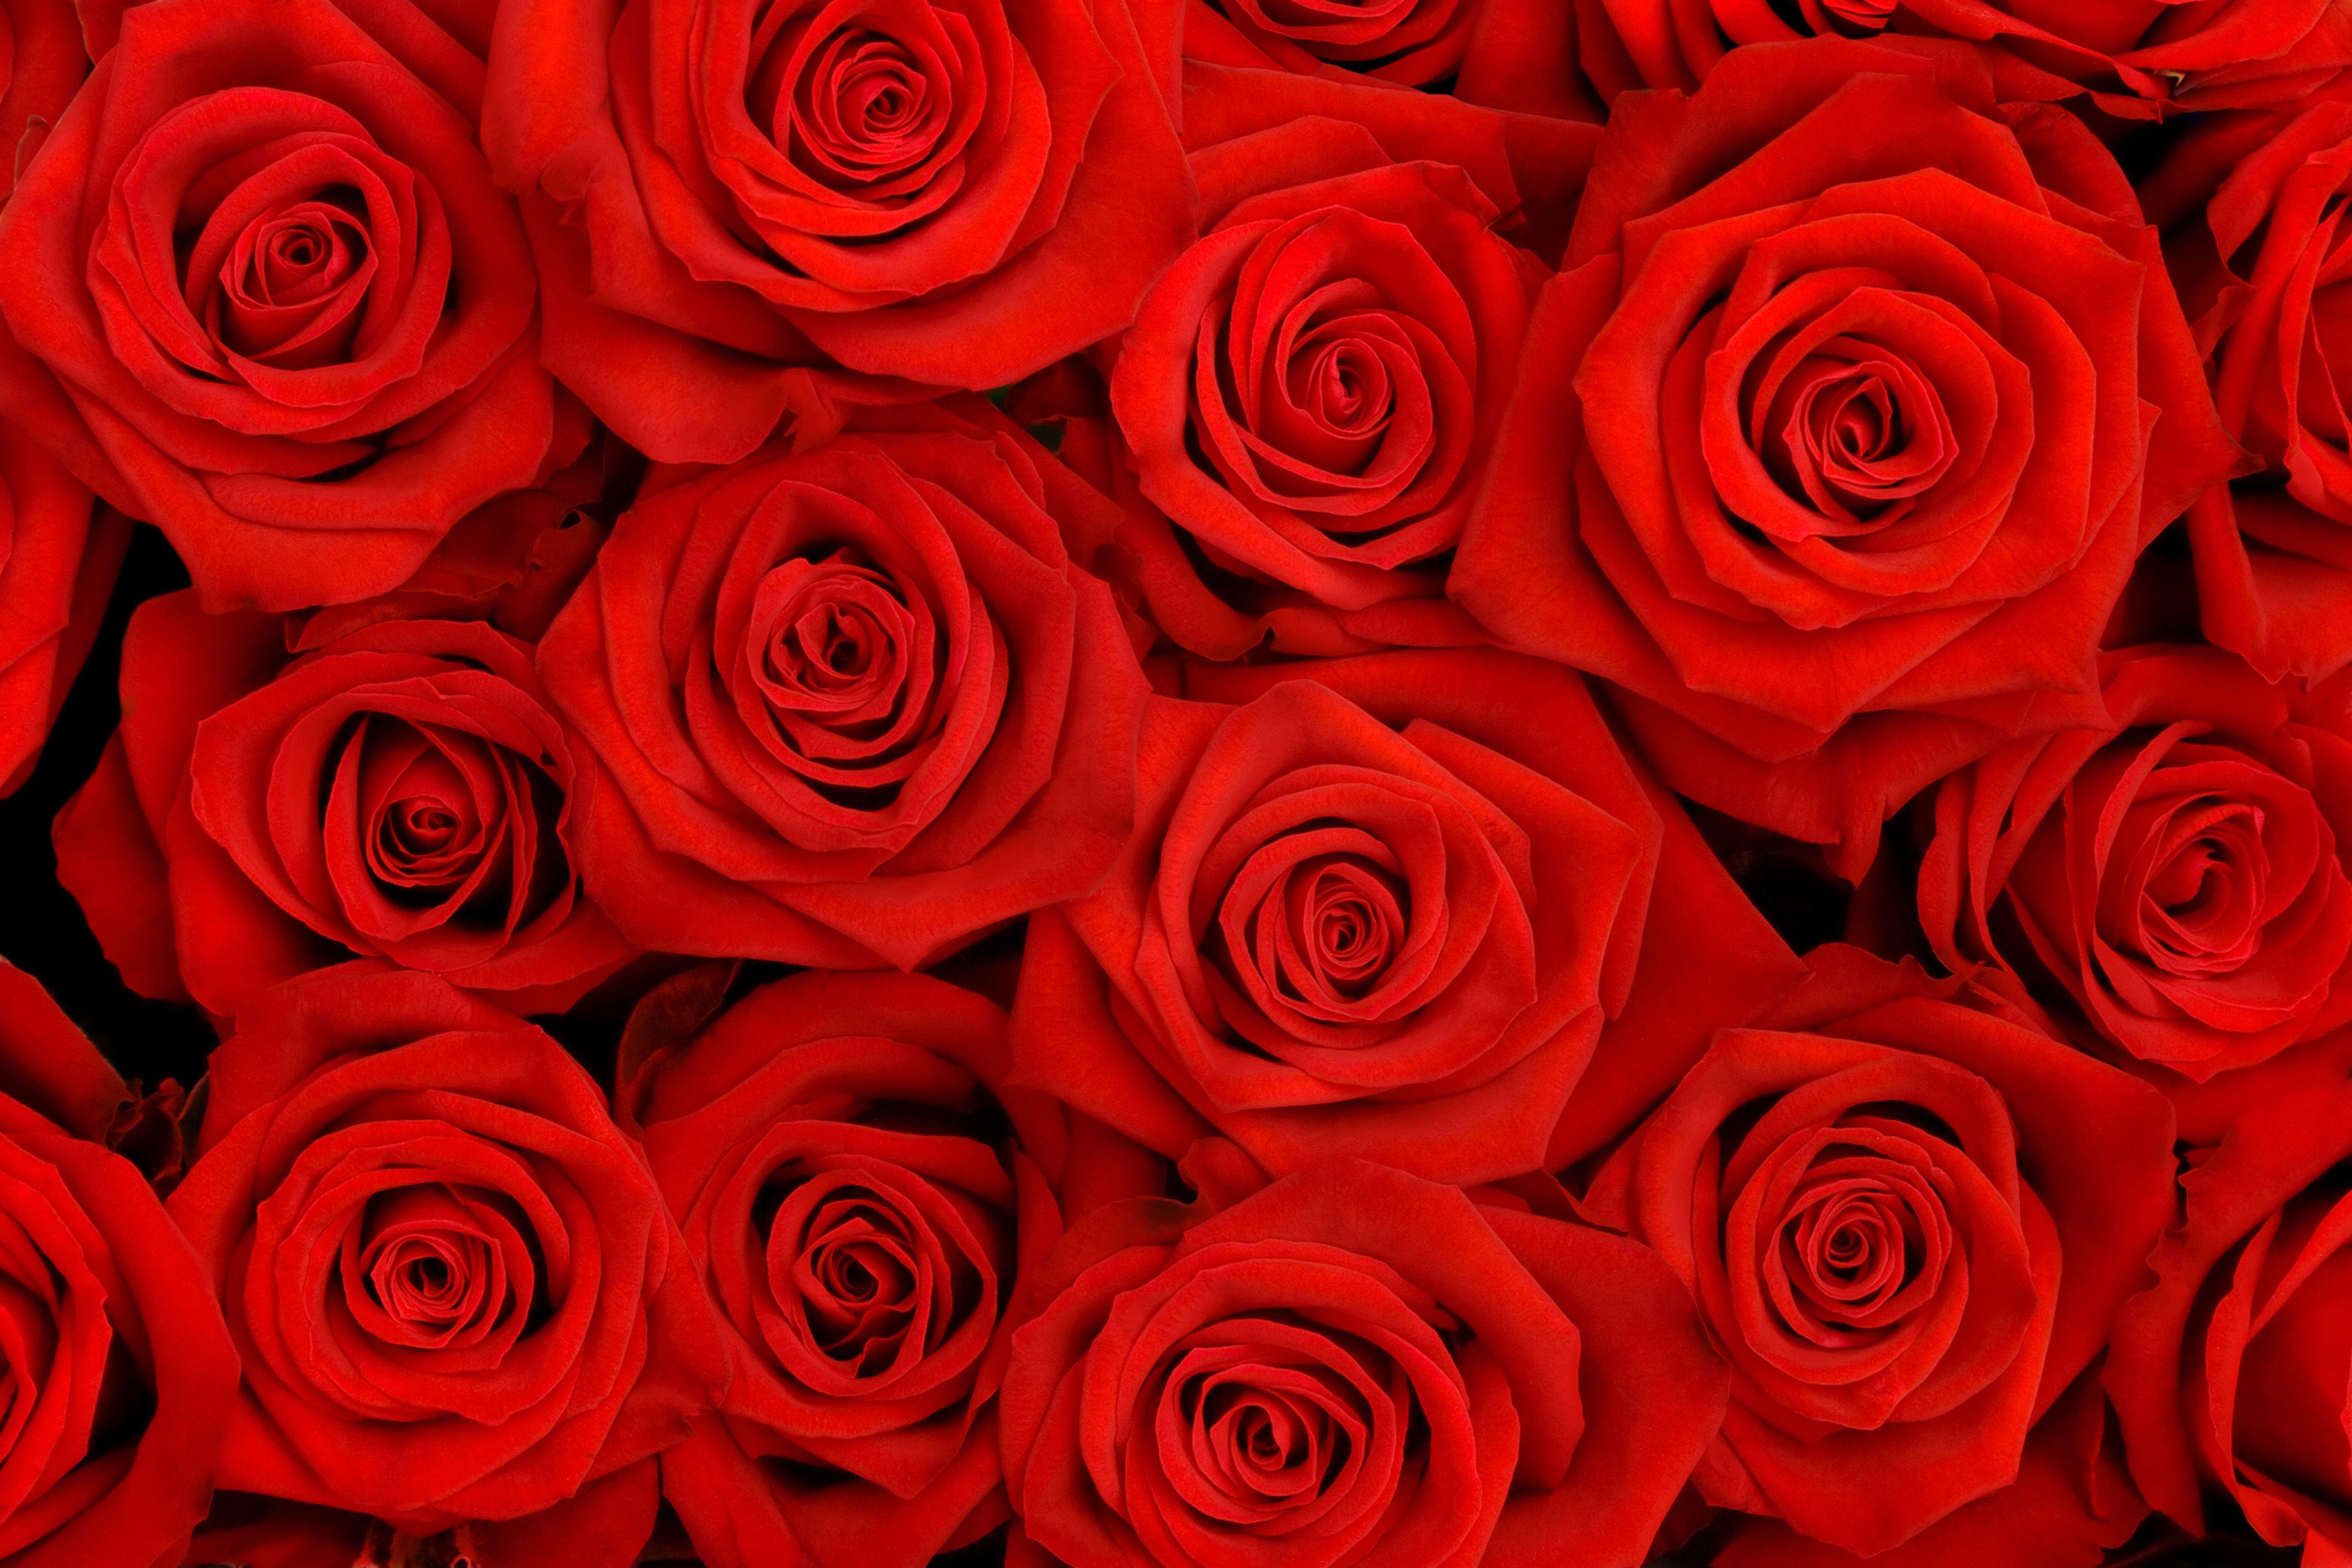 Red Roses Background Quality Image